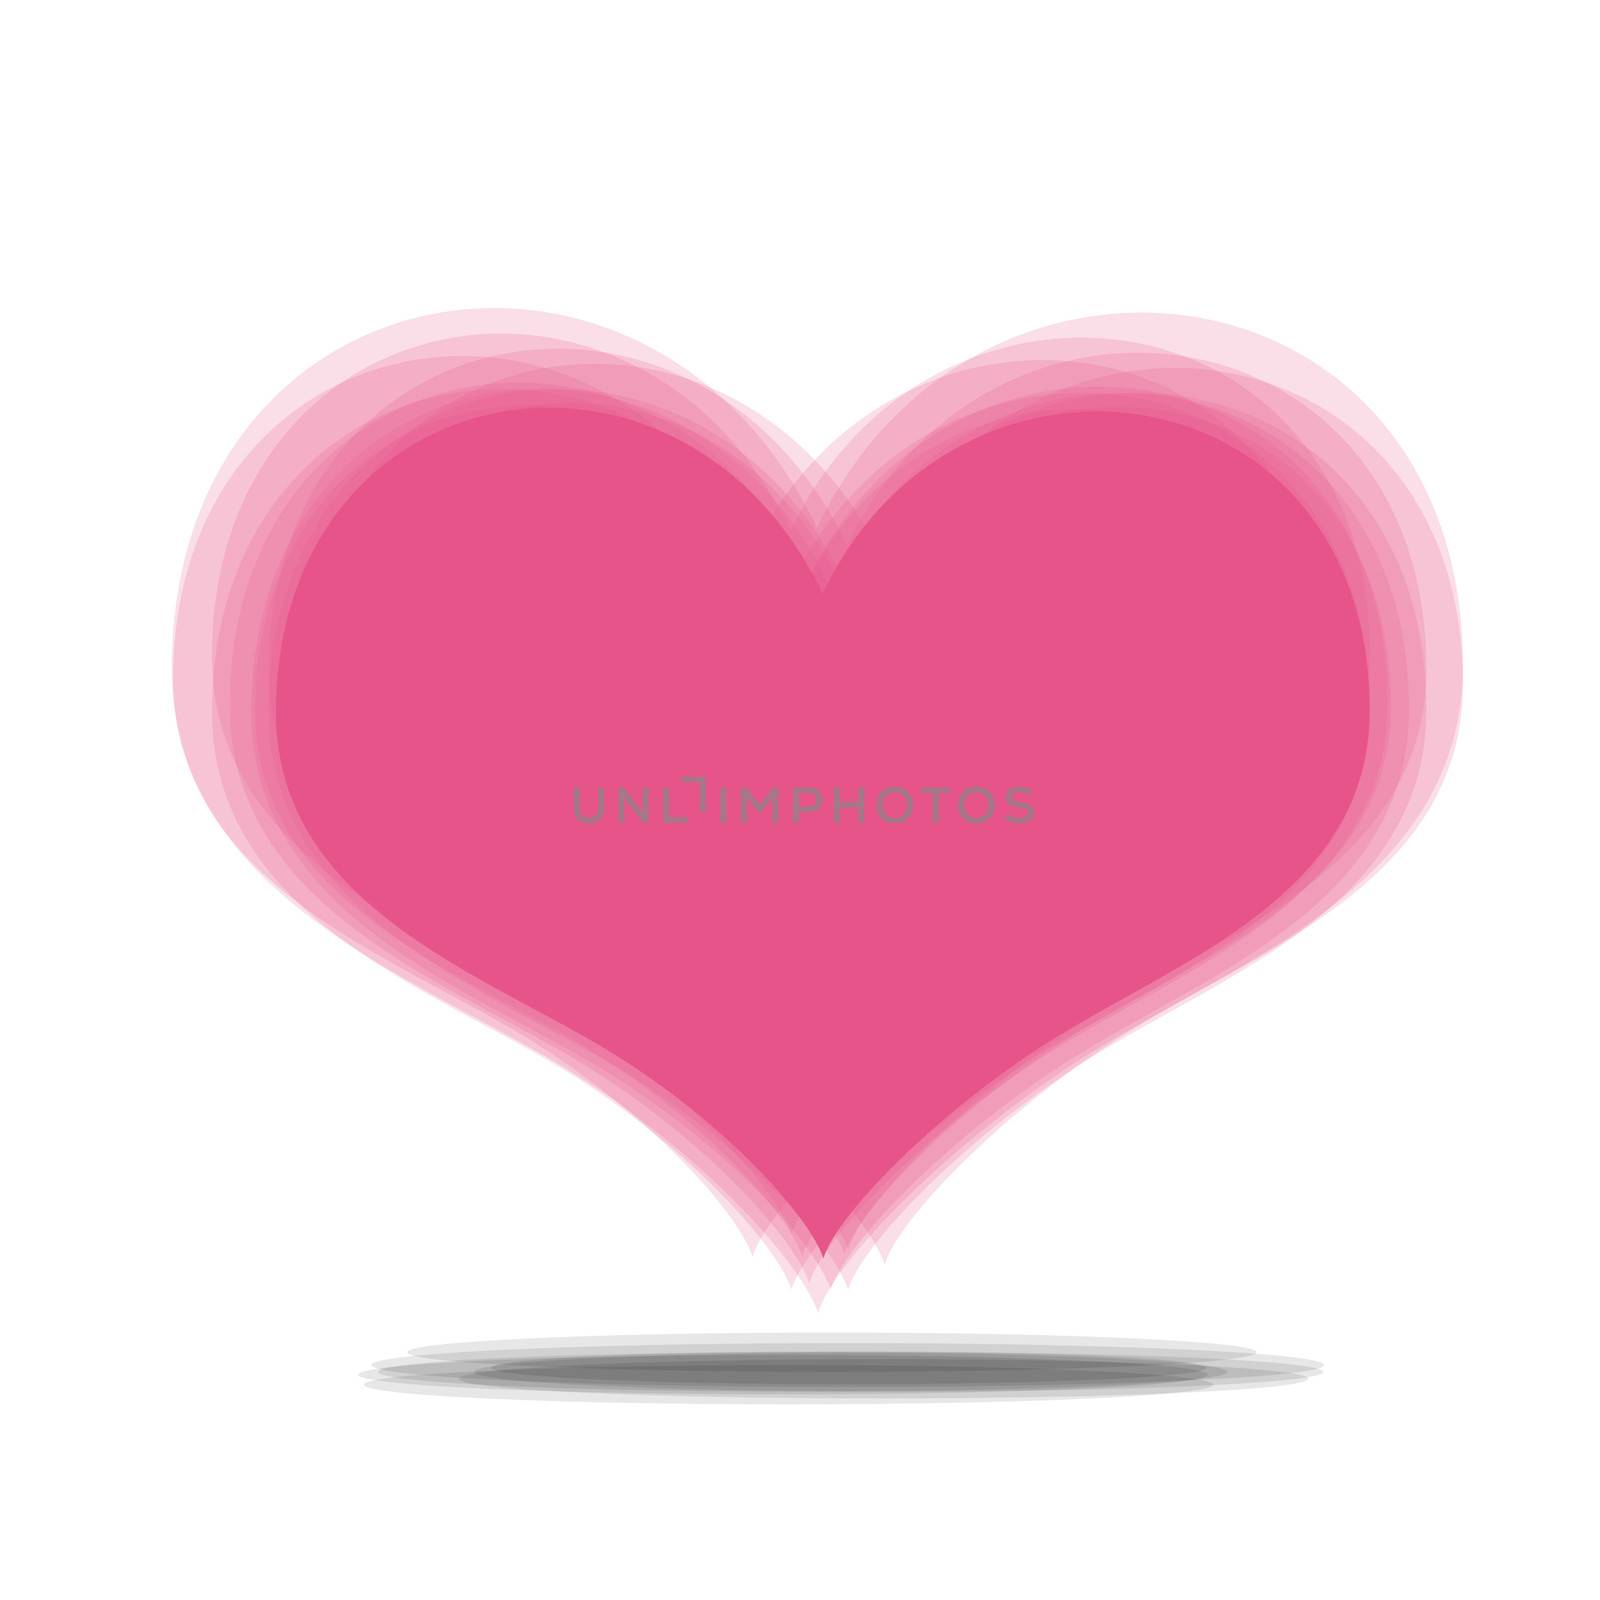 Pink heart. The concept of Valentine's Day